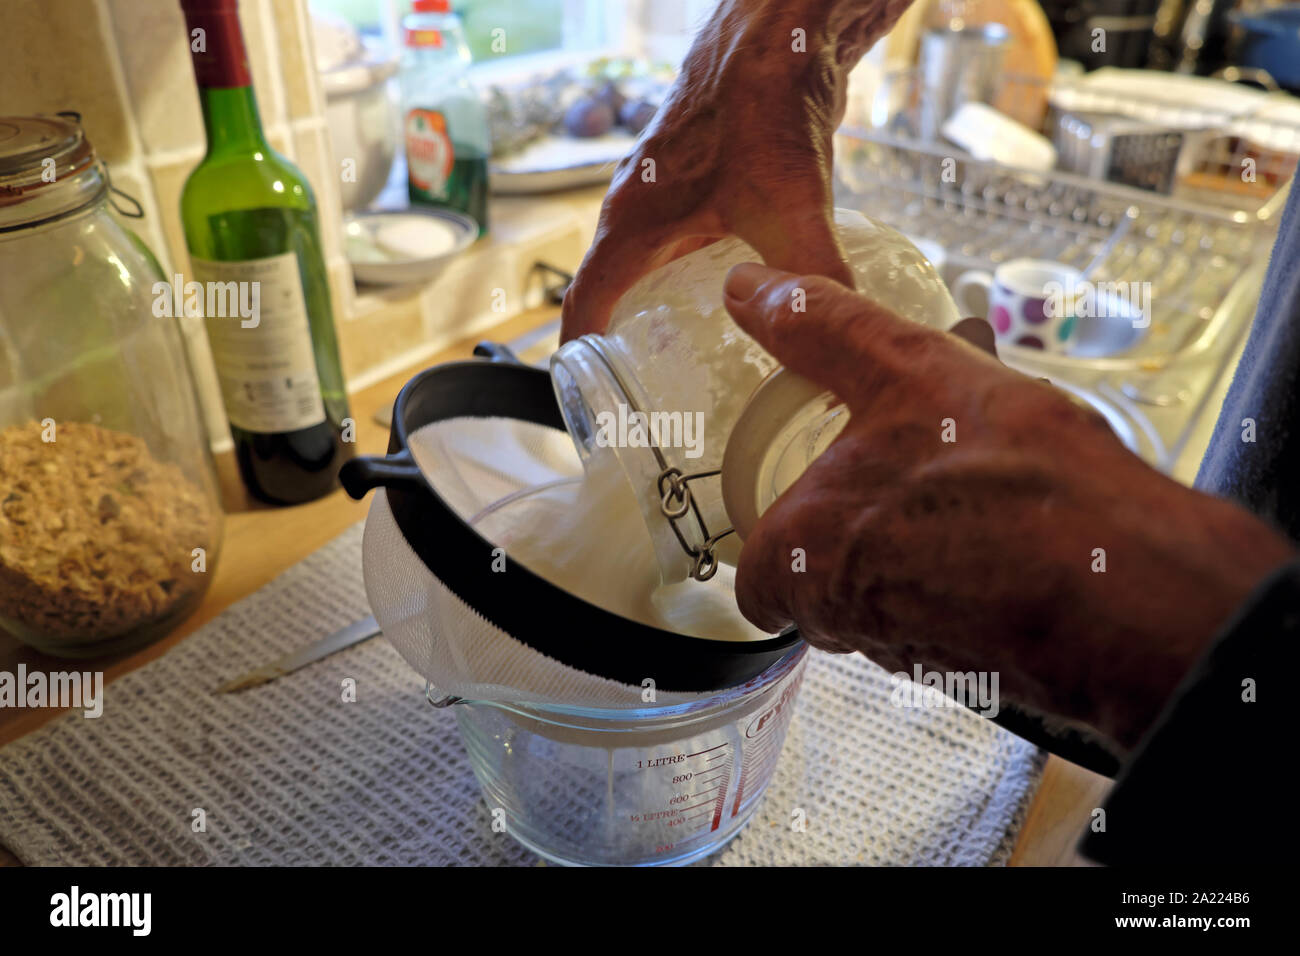 A person making kefir a homemade organic probiotic product by fermentation with whole milk in a kilner jar in a kitchen at home Wales UK KATHY DEWITT Stock Photo